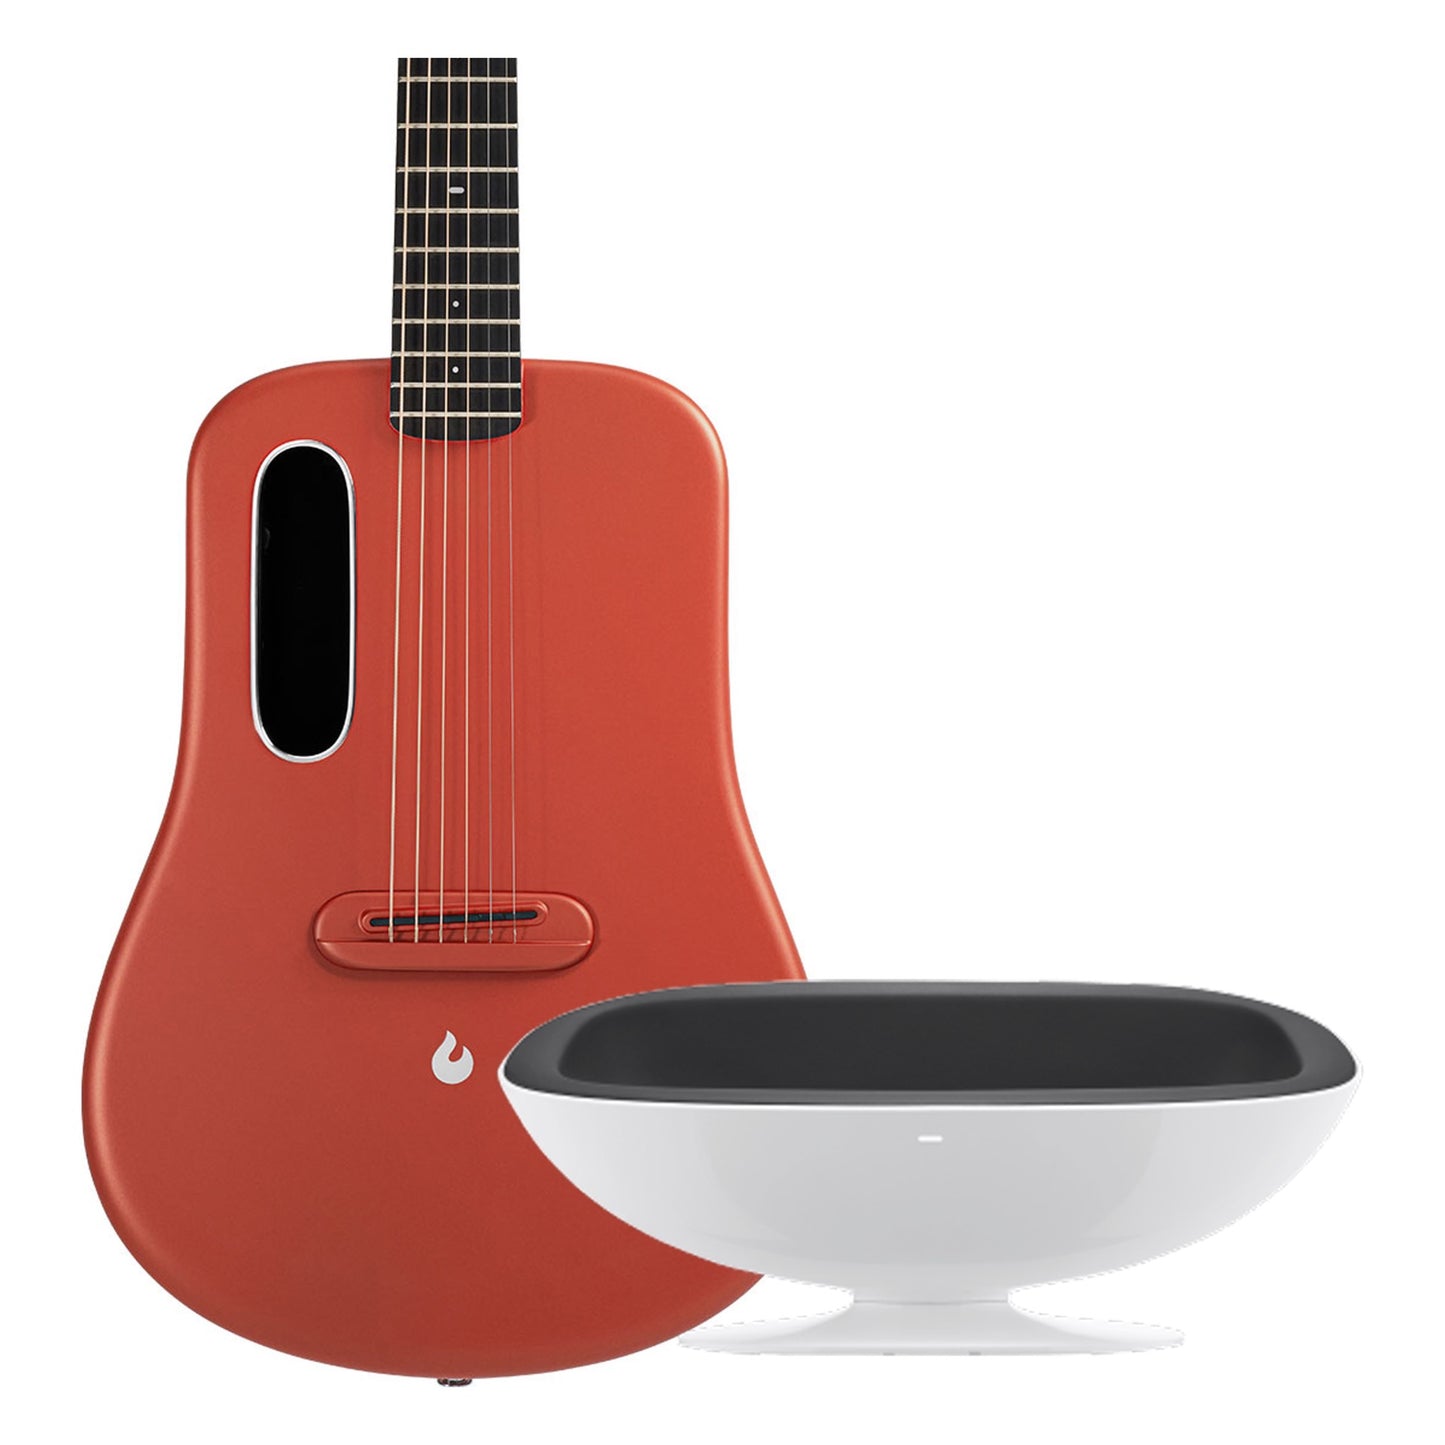 Lava Music Lava ME 3 36” Smart Guitar in Red w/ Space Bag